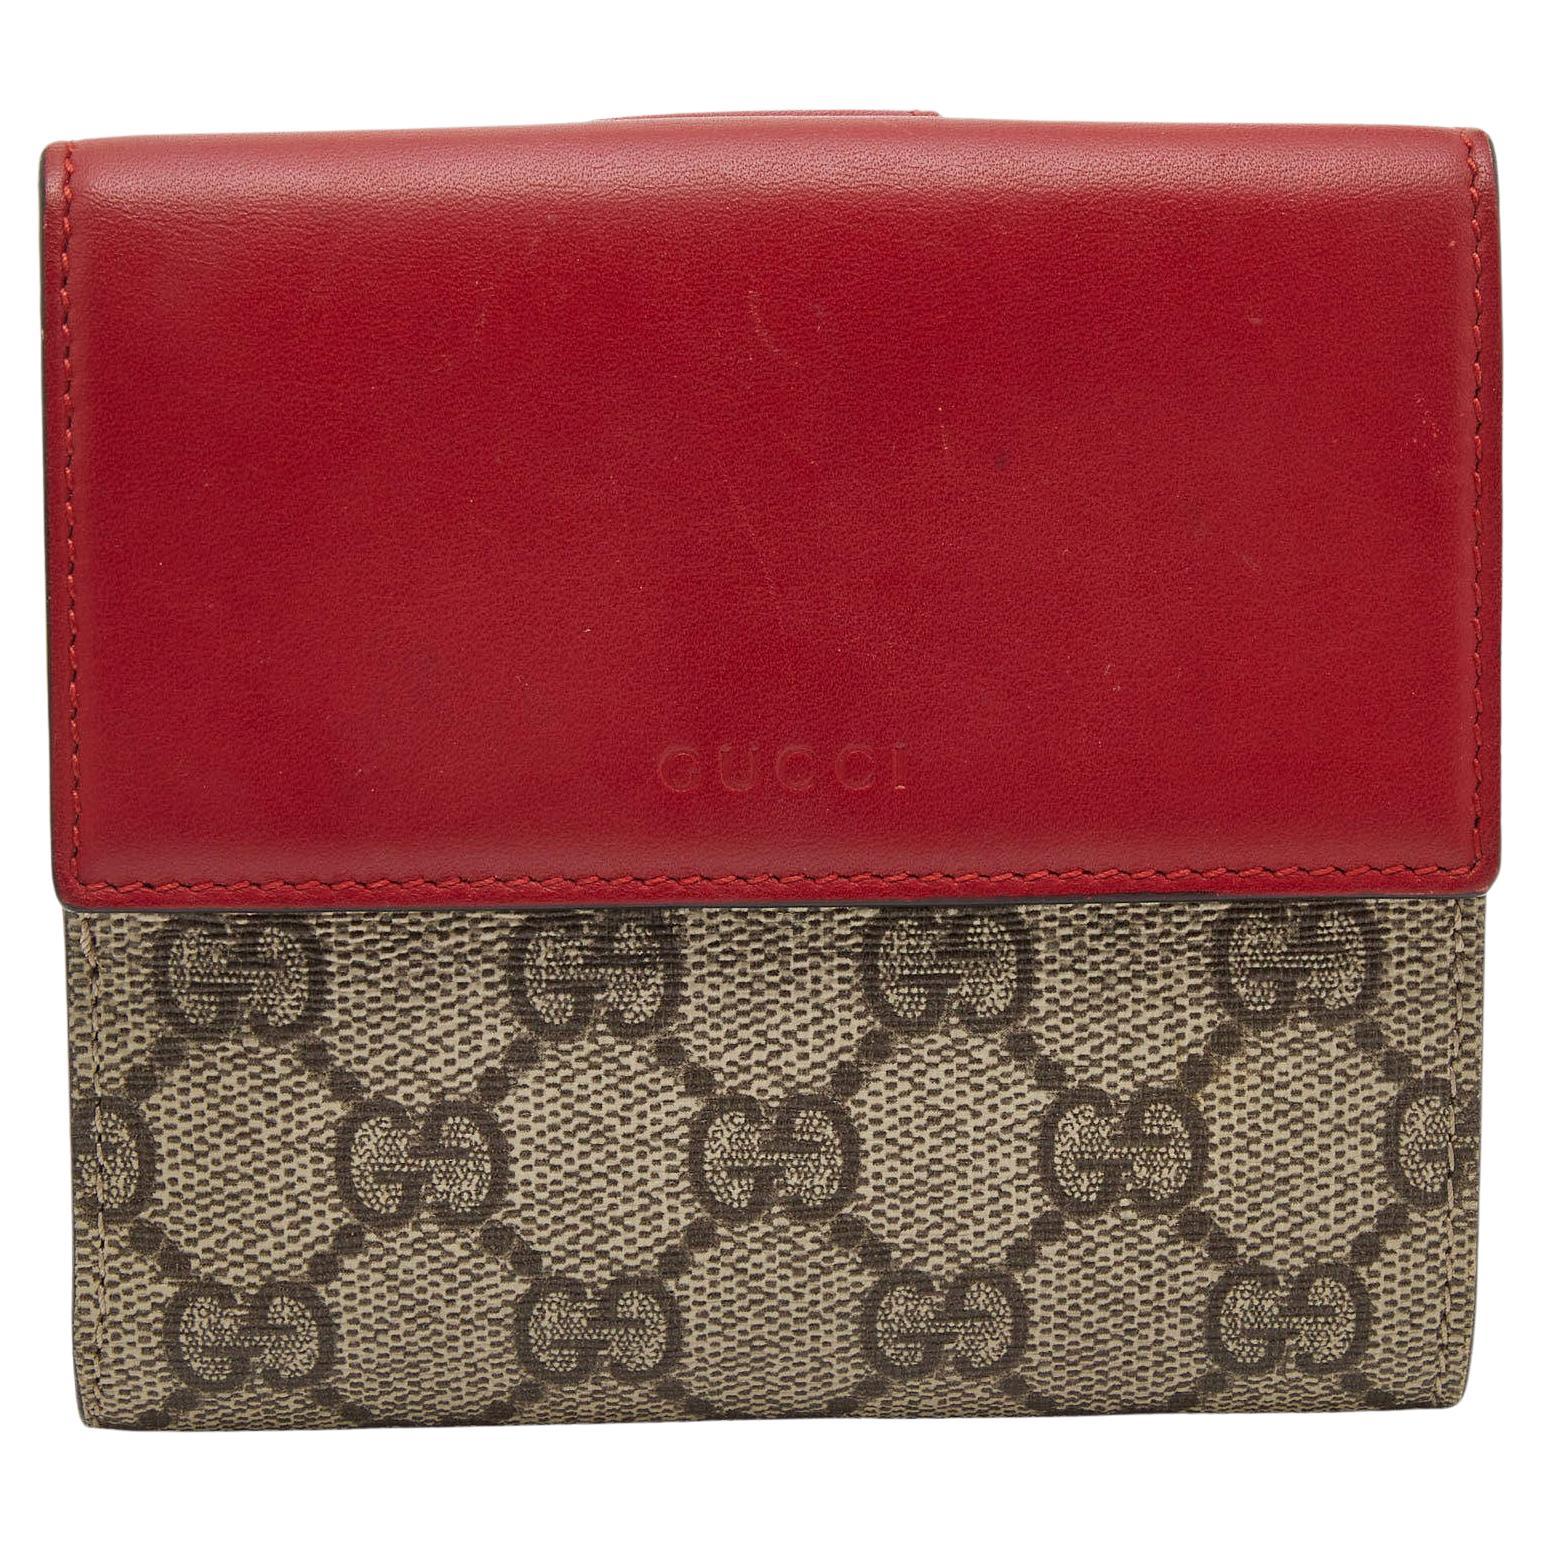 Gucci Red/Beige GG Supreme Coated Canvas and Leather French Flap Wallet For Sale